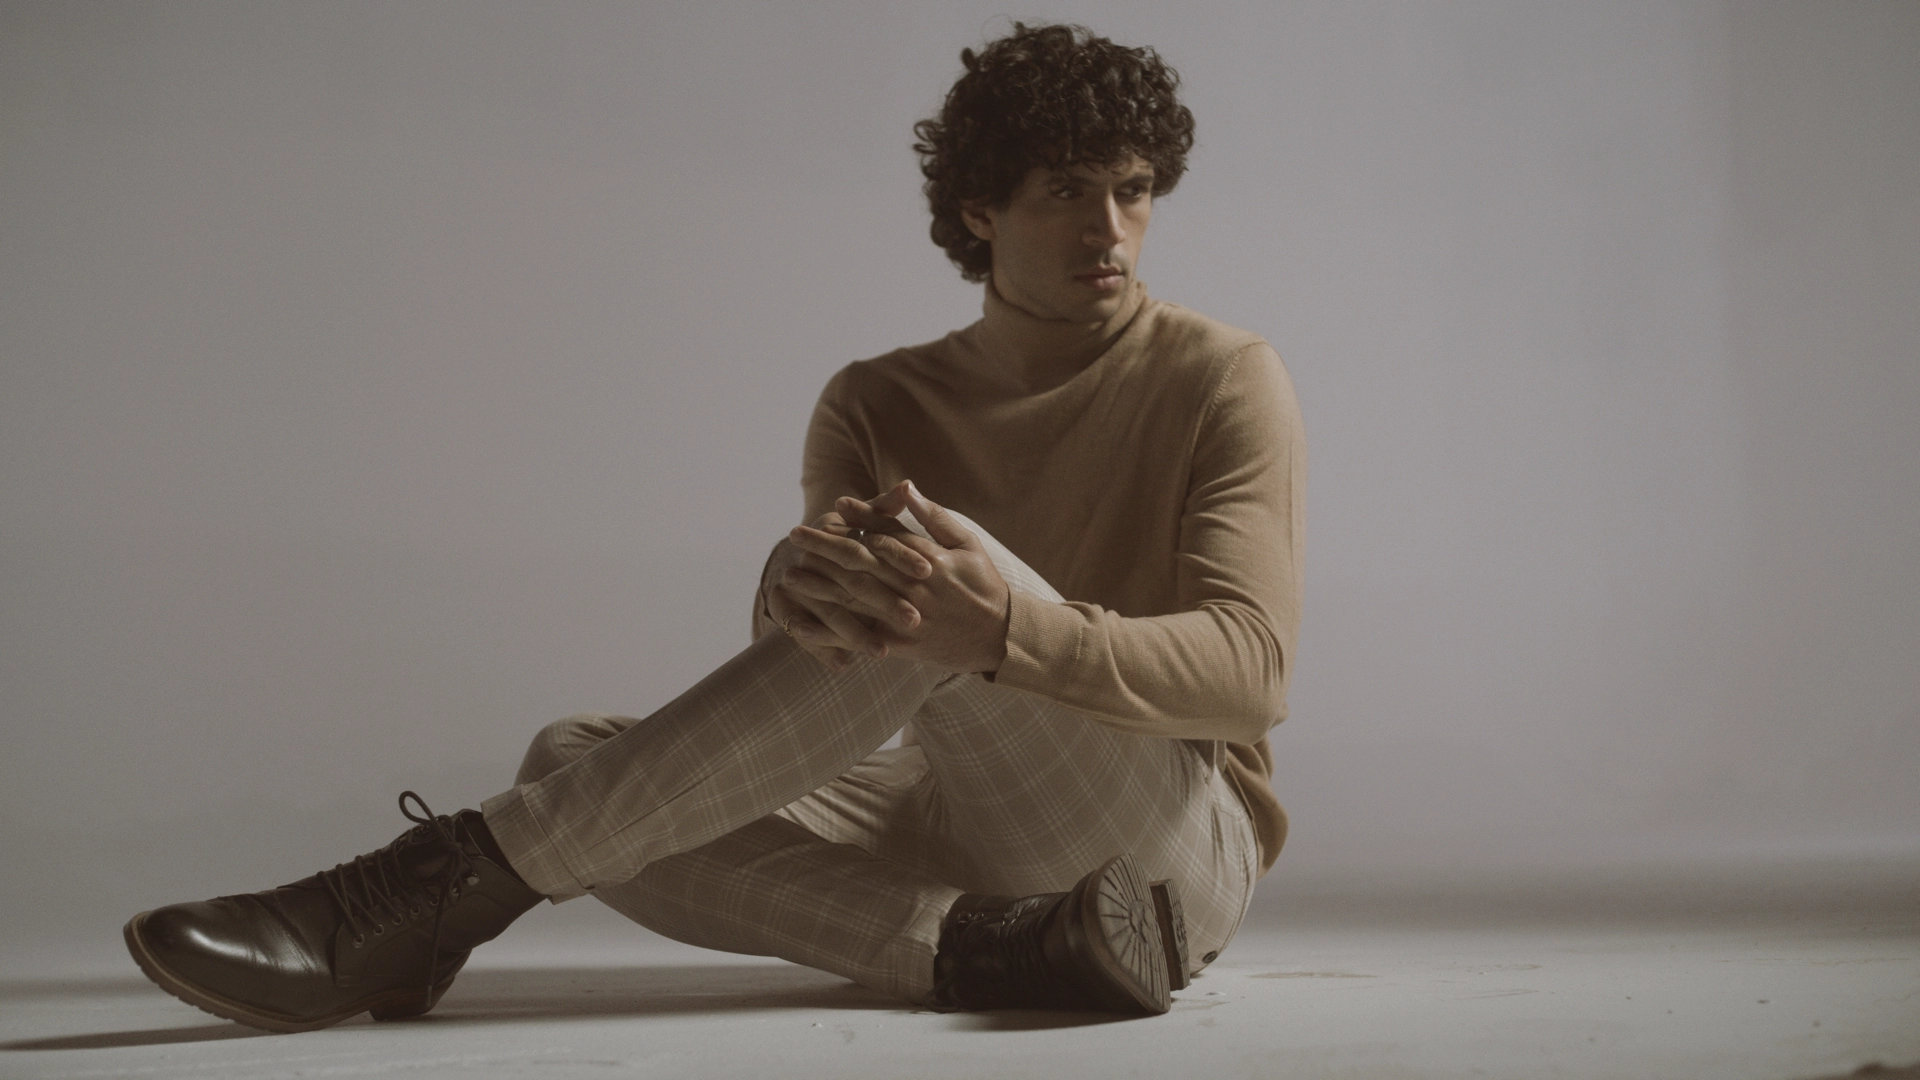 Man with curly hair wearing beige sweater and patterned pants